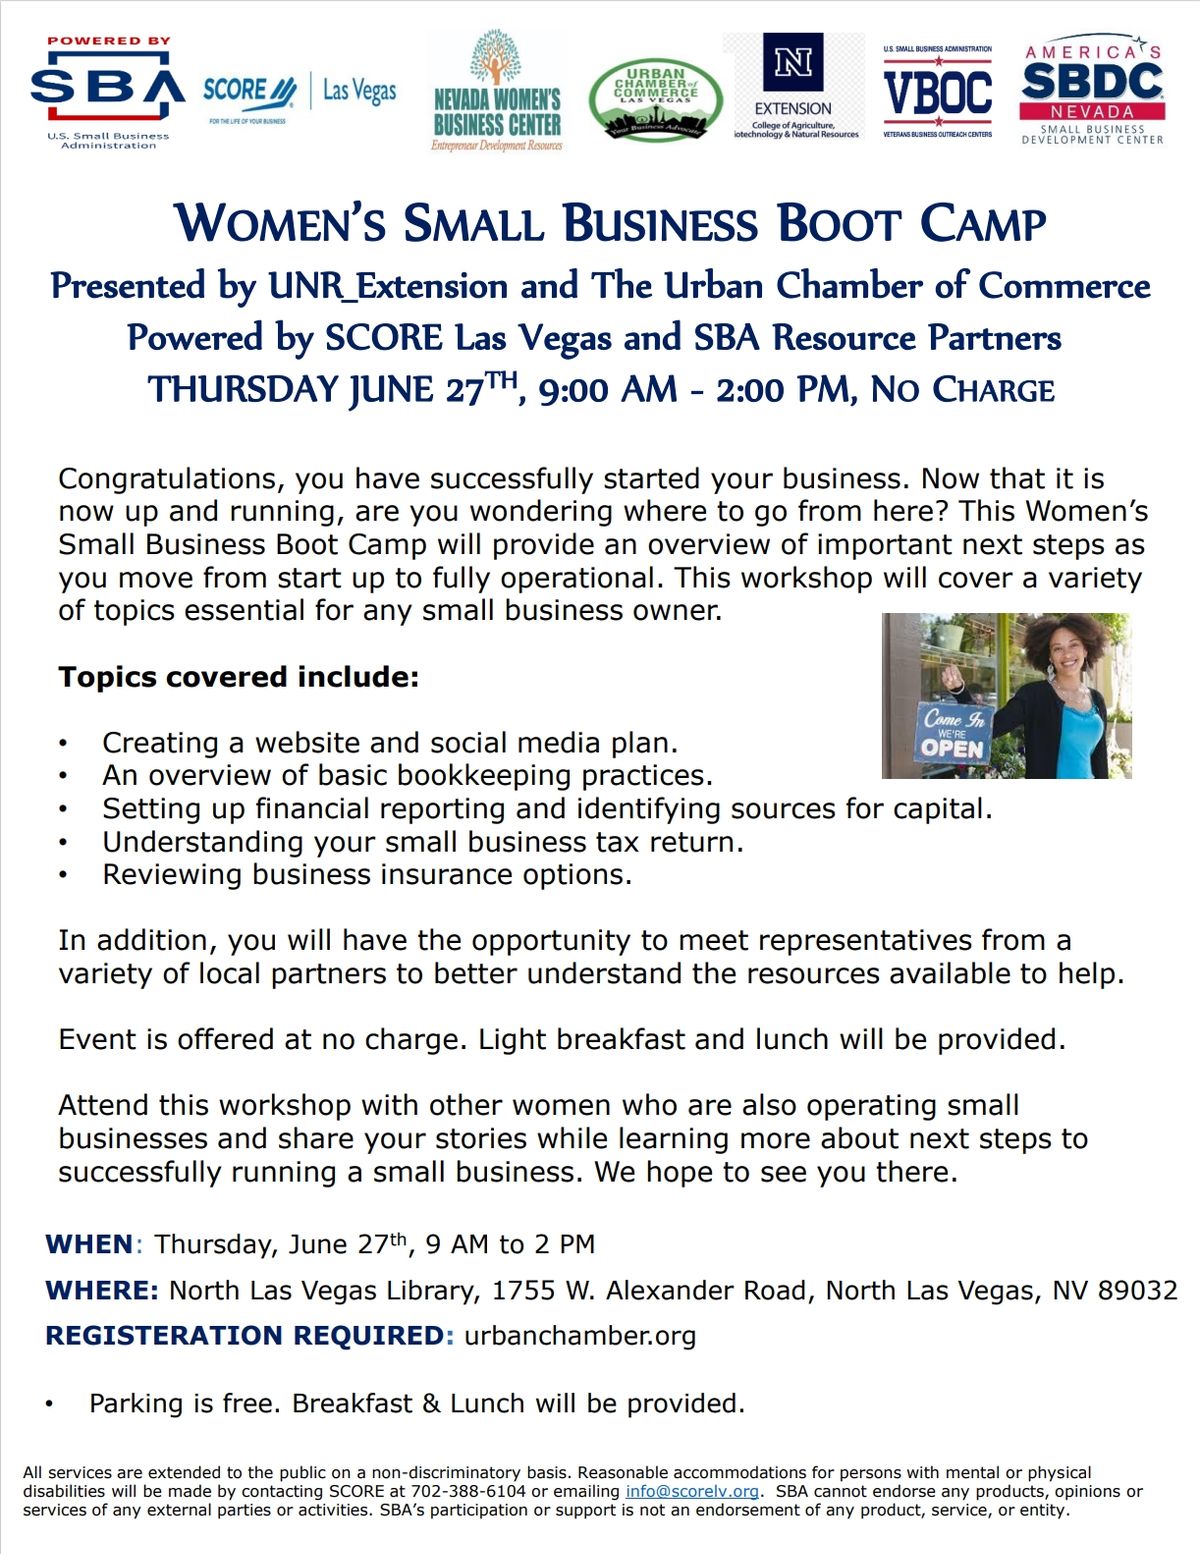 Women's Small Business Boot Camp